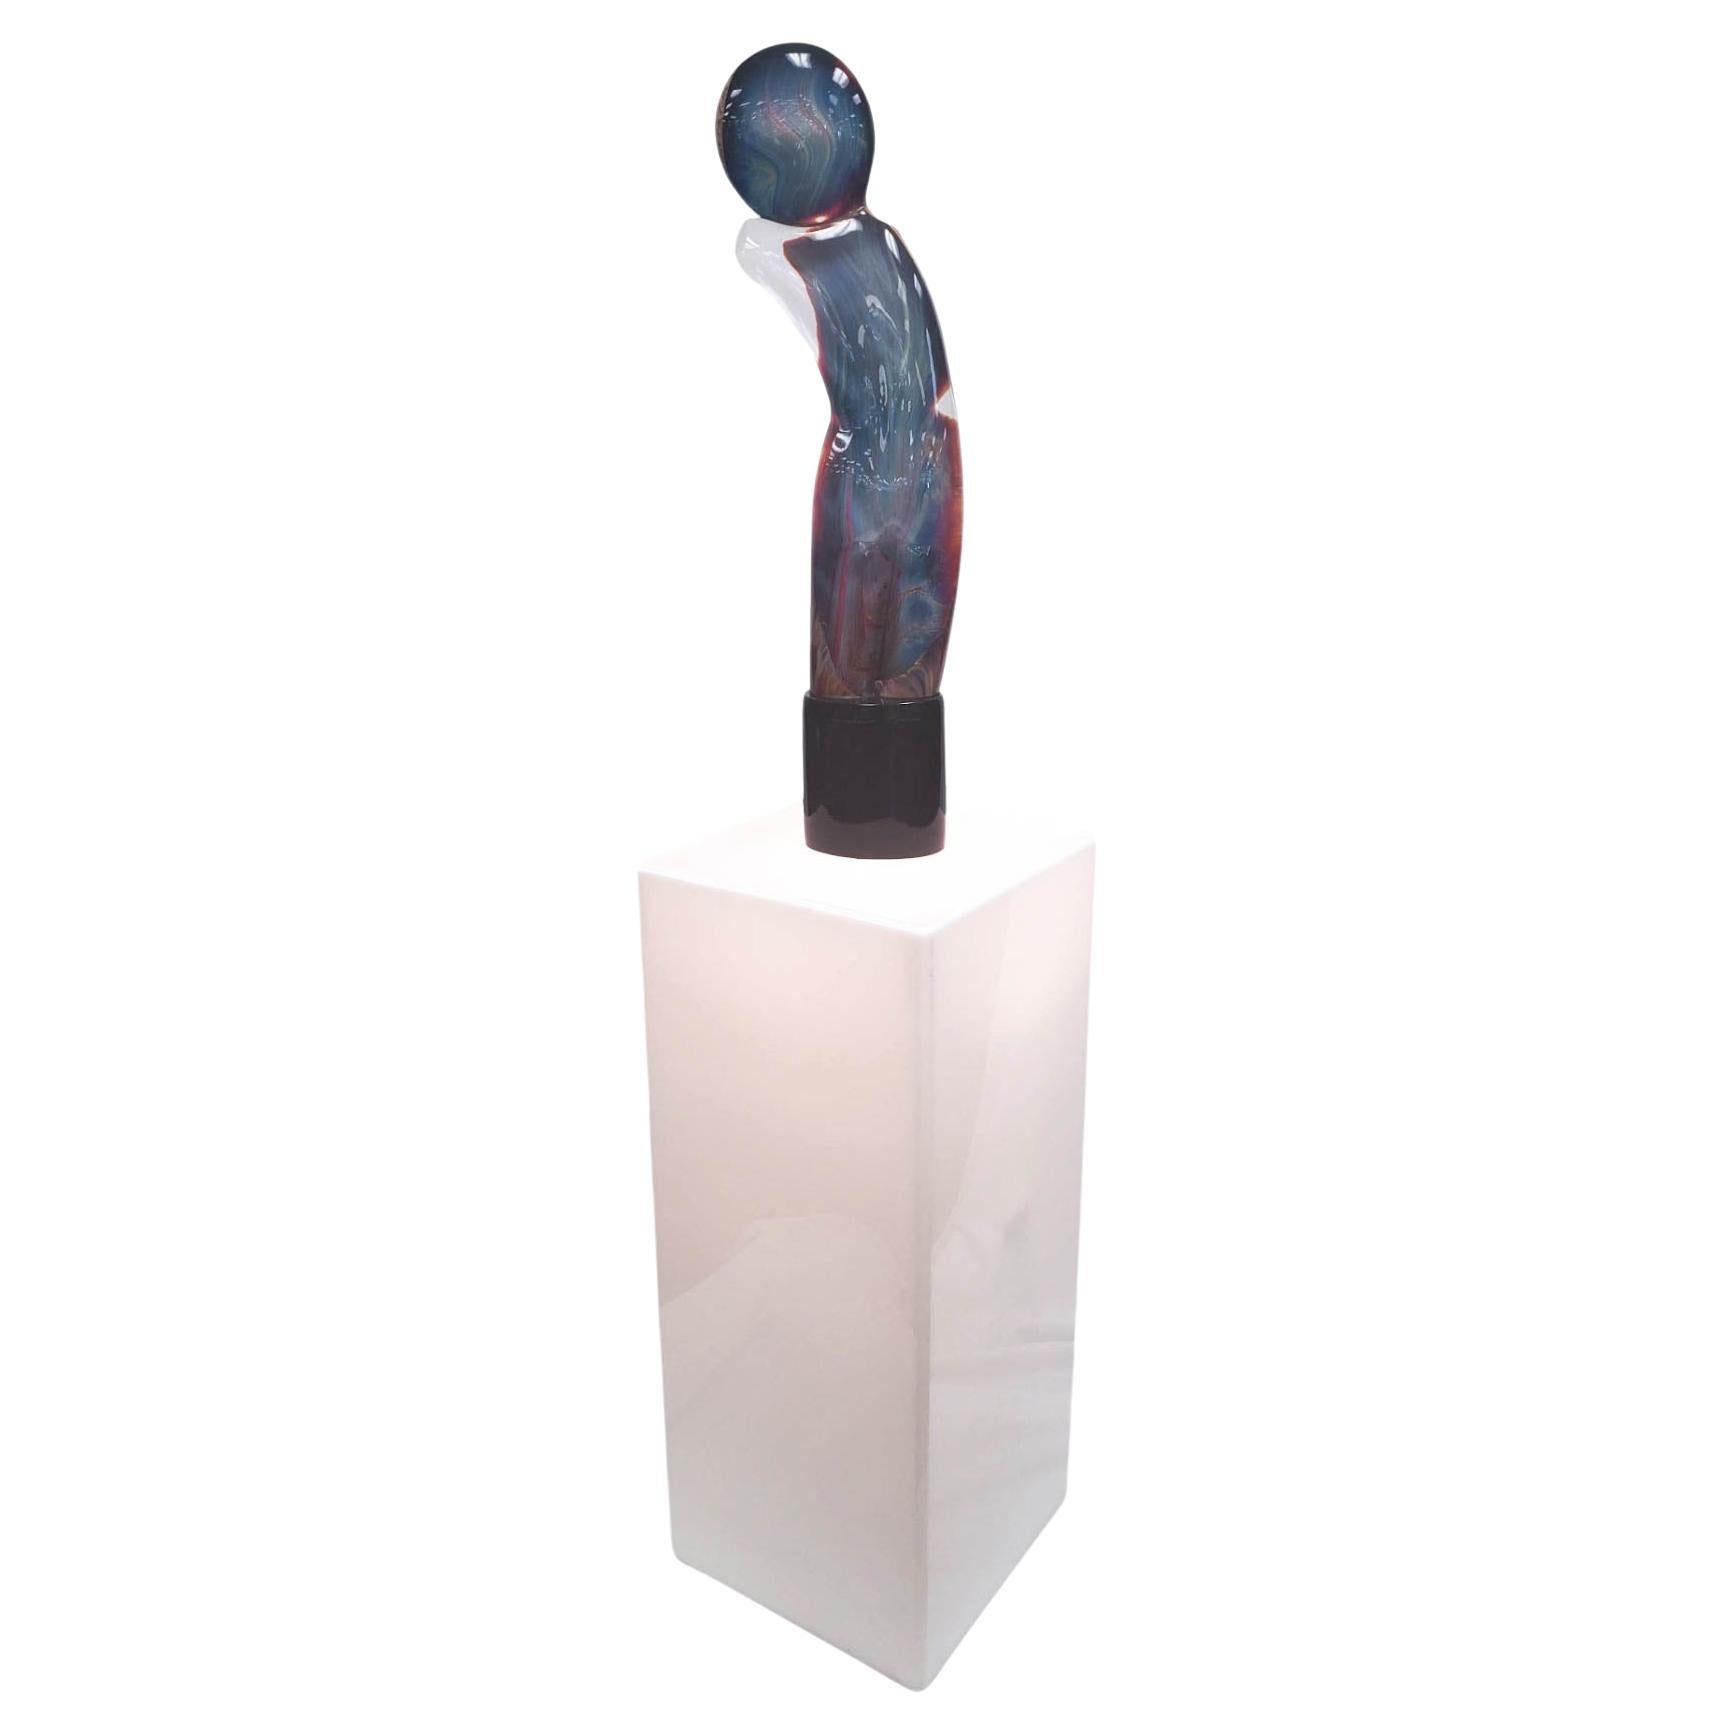 Murano Art Glass Sculpture on Lit Pedestal by Loredano Rosin, Signed For Sale